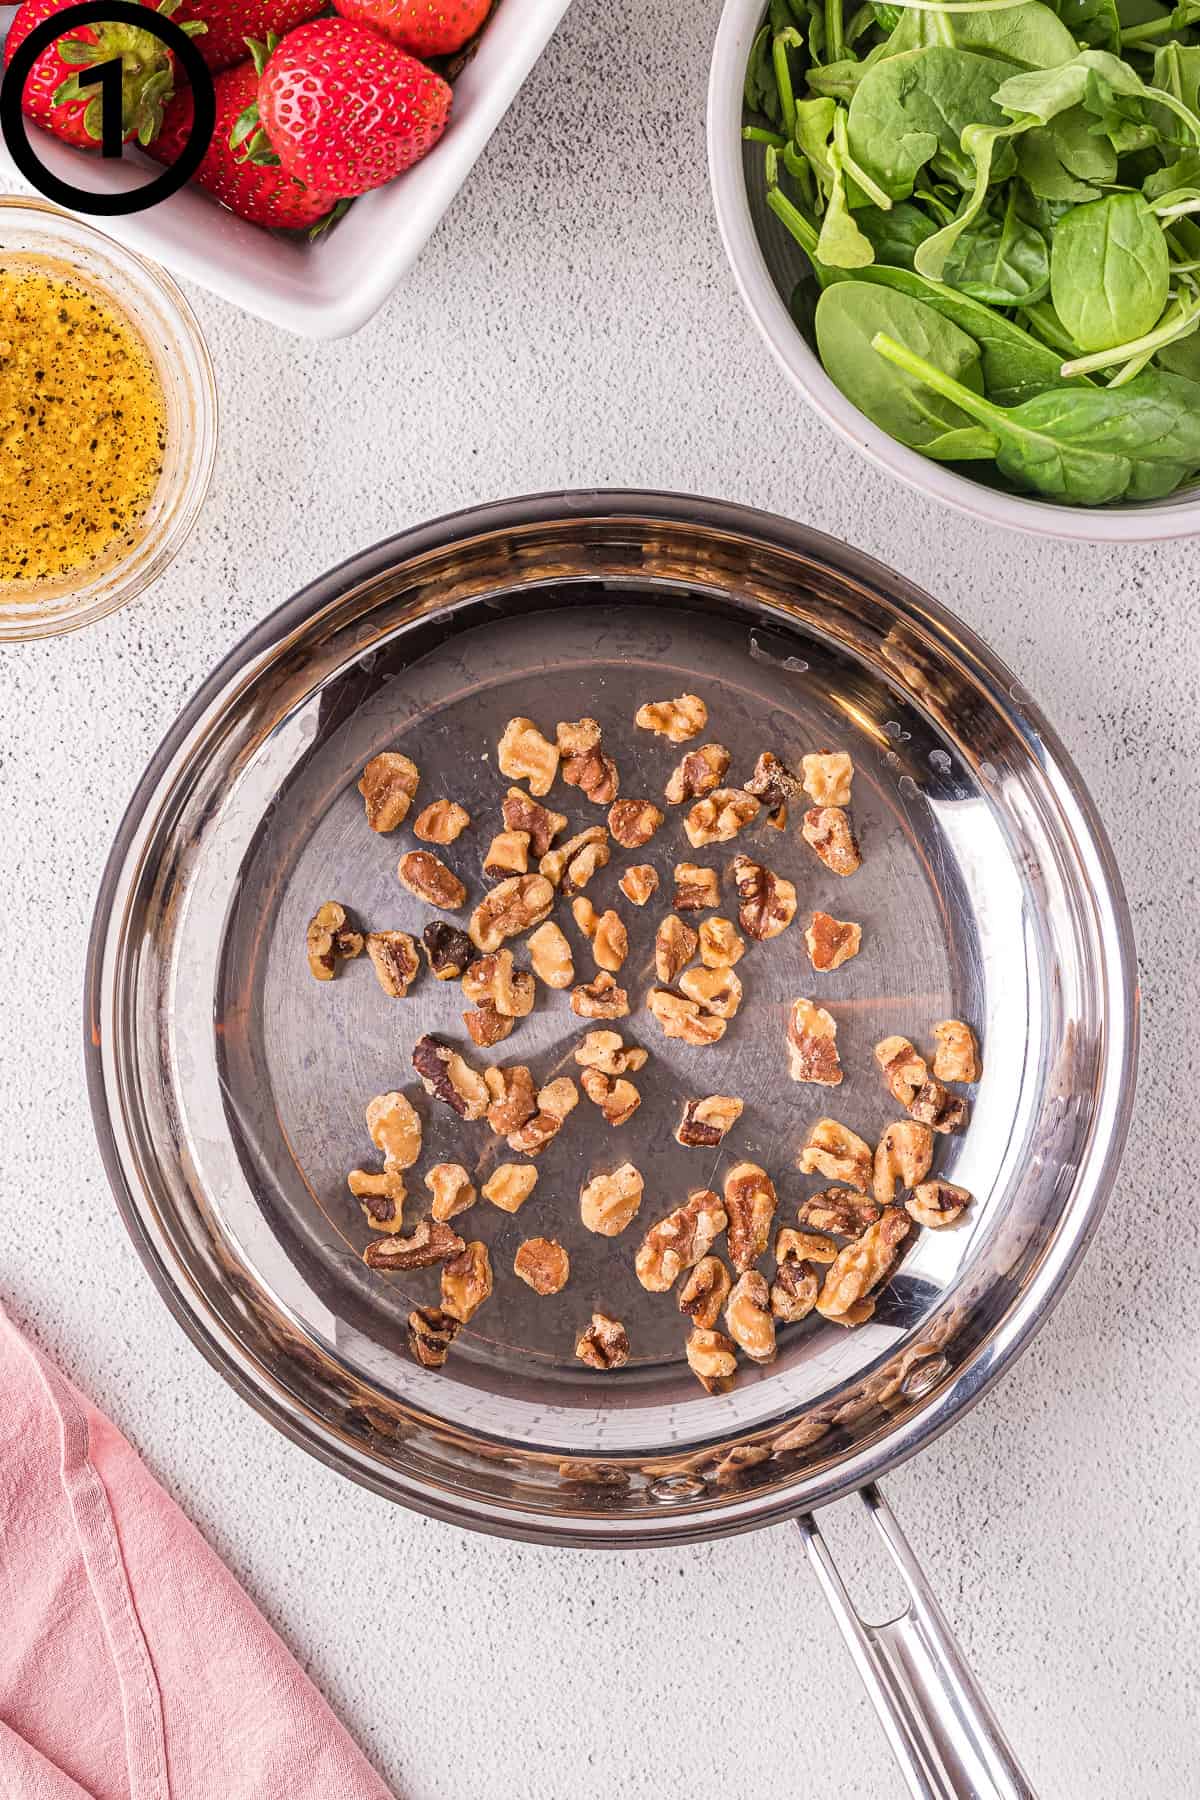 Toasted walnuts in a pan.